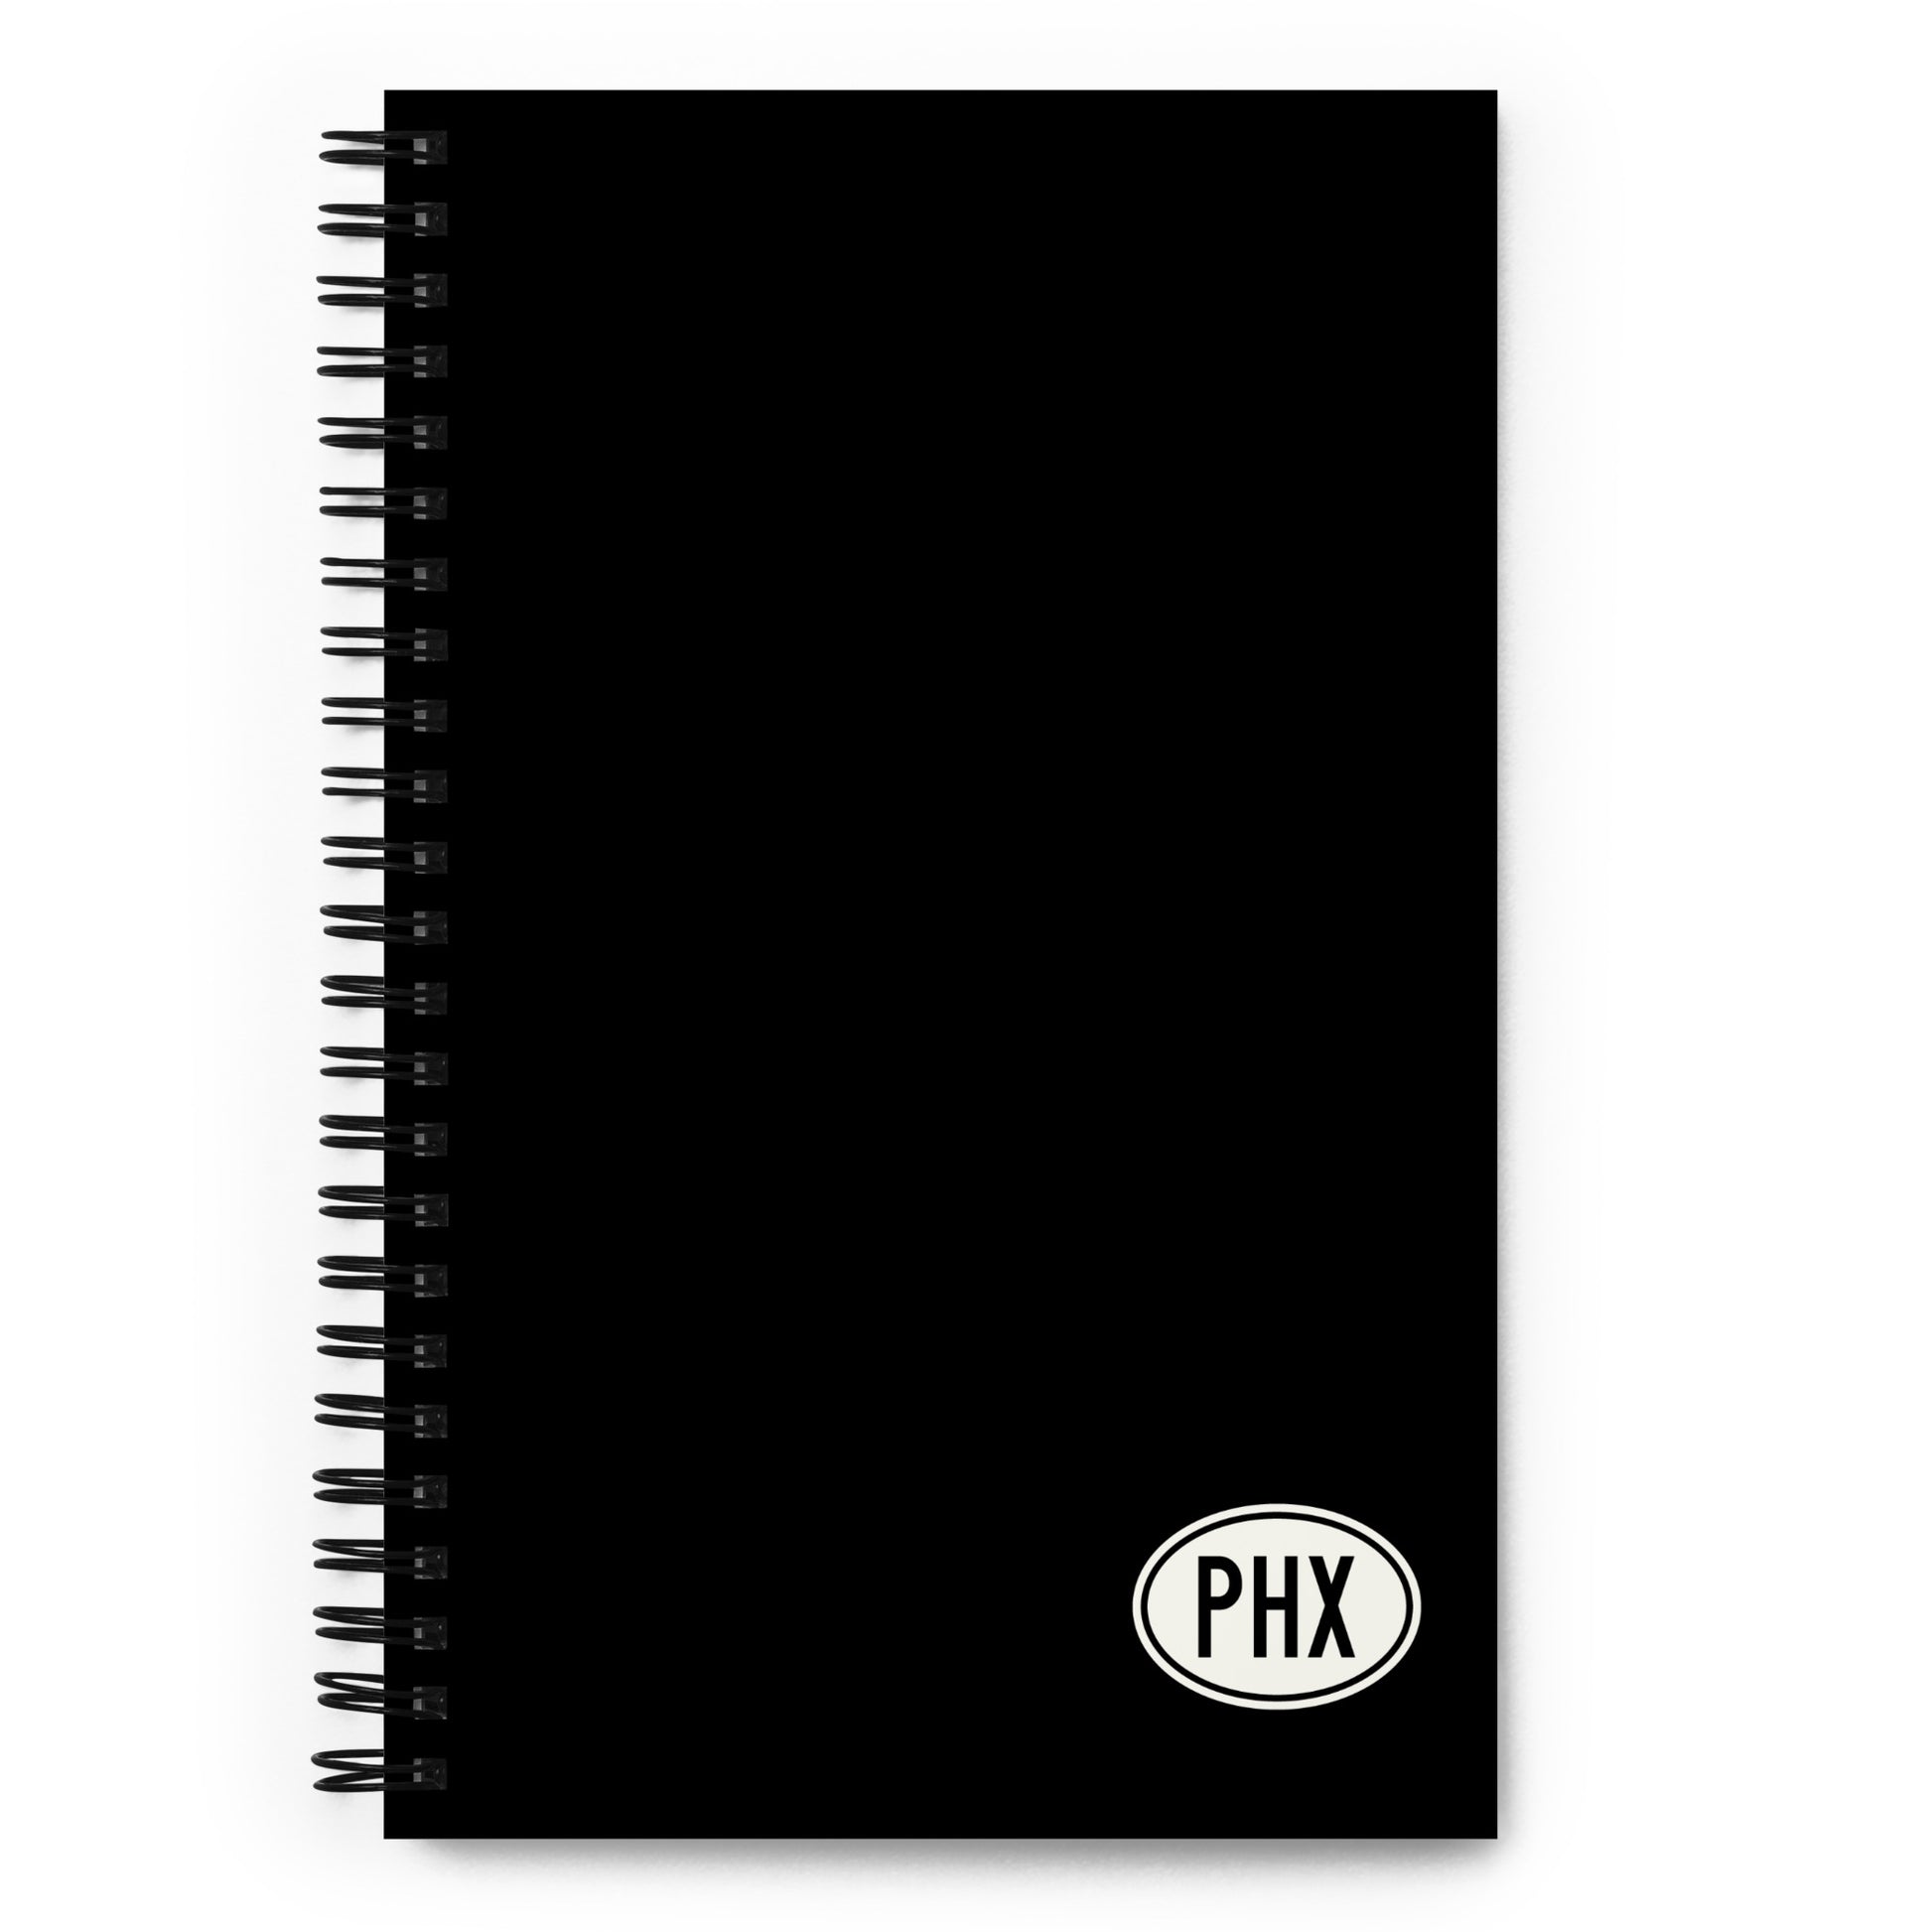 Unique Travel Gift Spiral Notebook - White Oval • PHX Phoenix • YHM Designs - Image 01